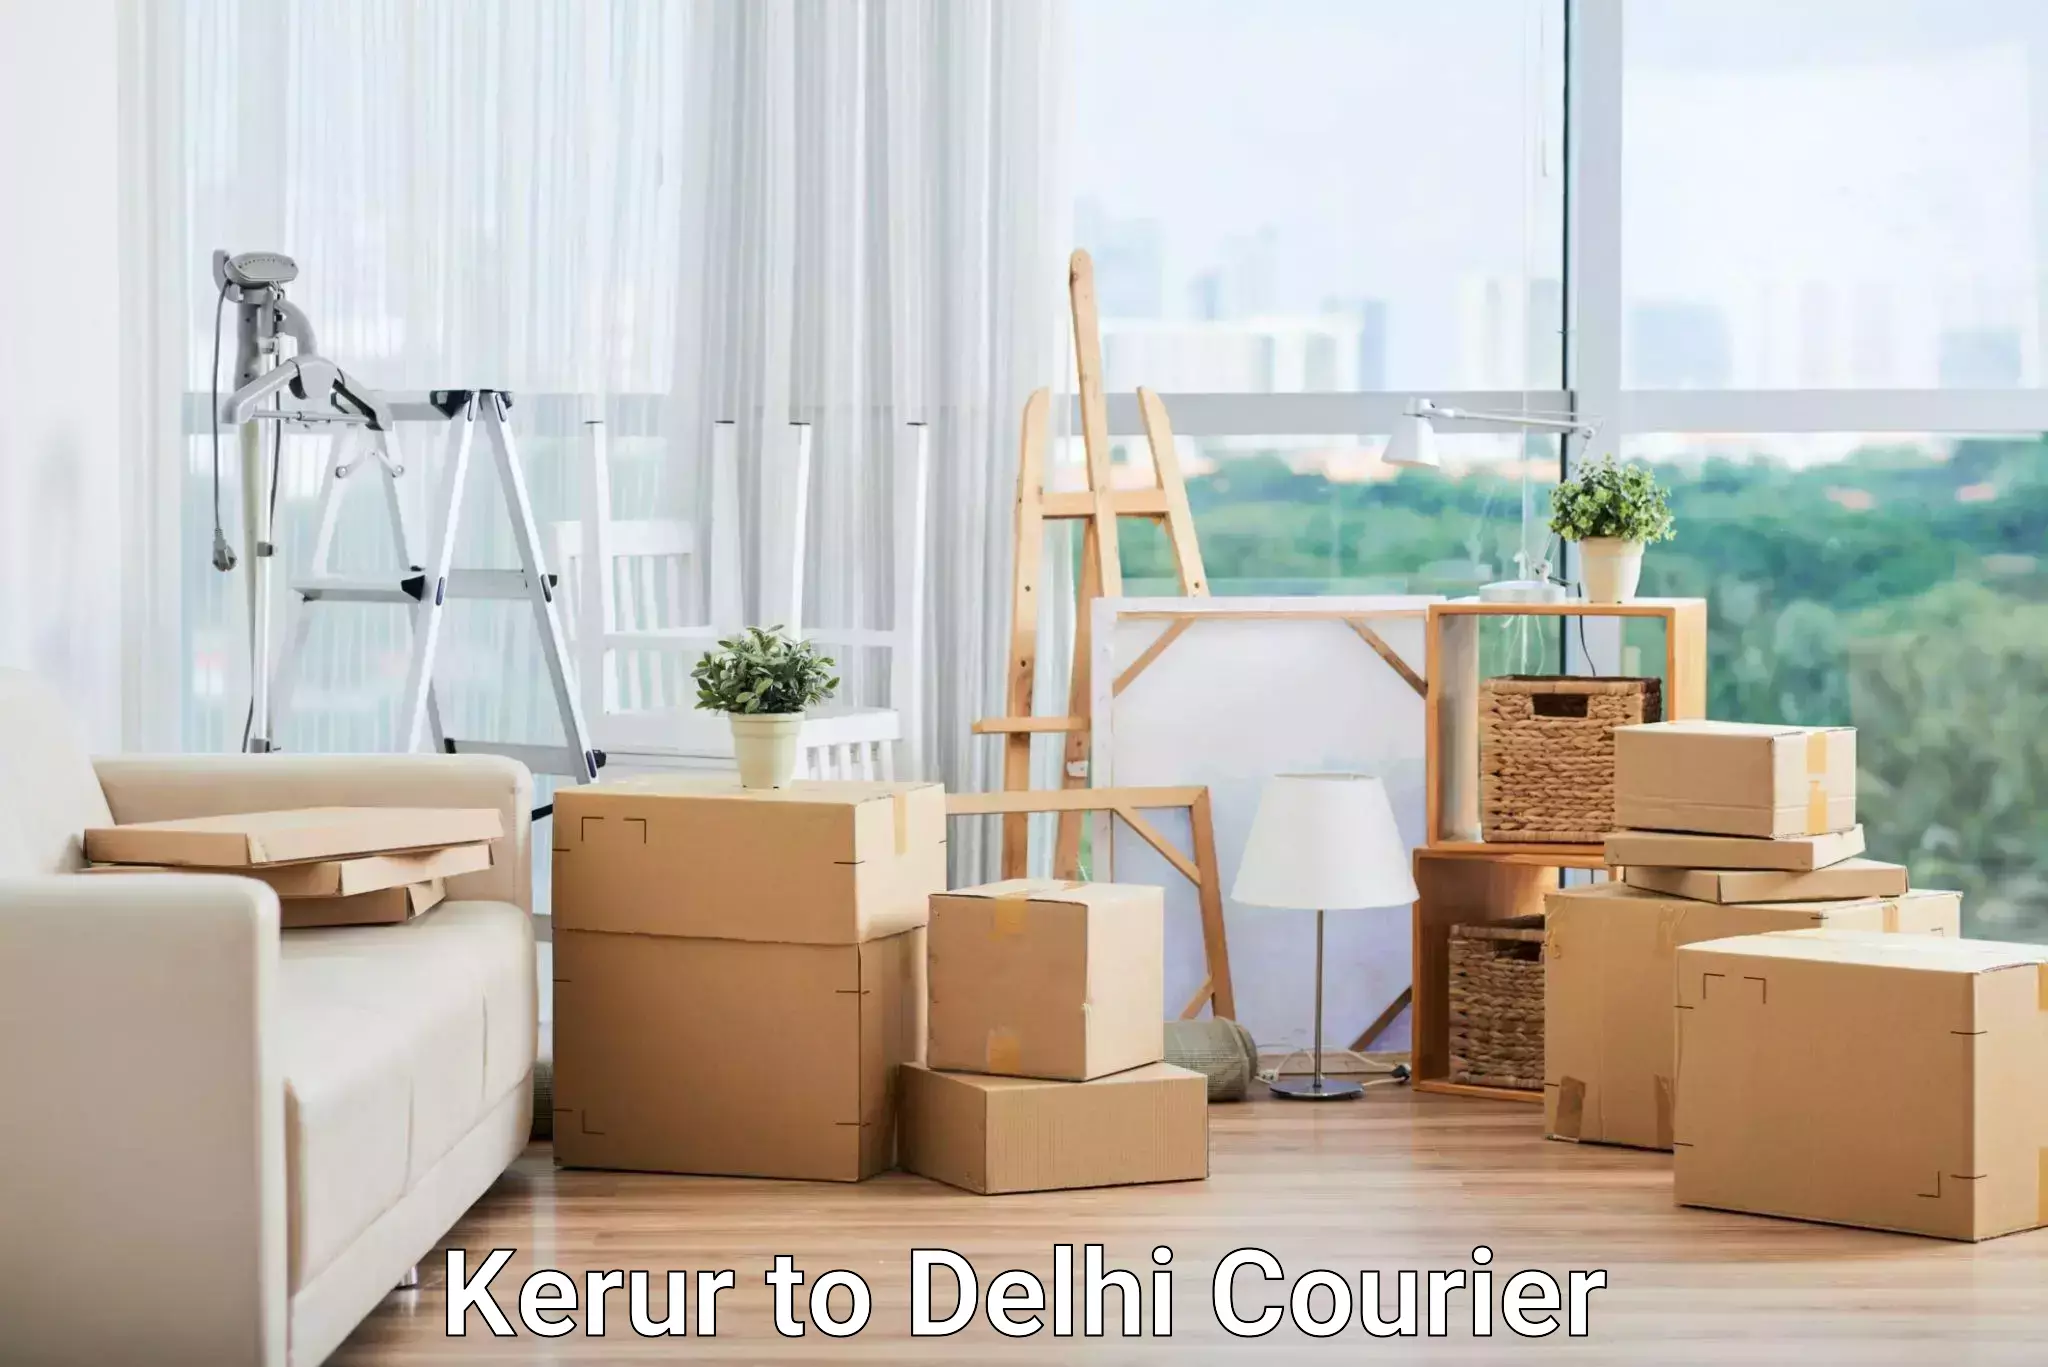 International courier networks Kerur to Lodhi Road